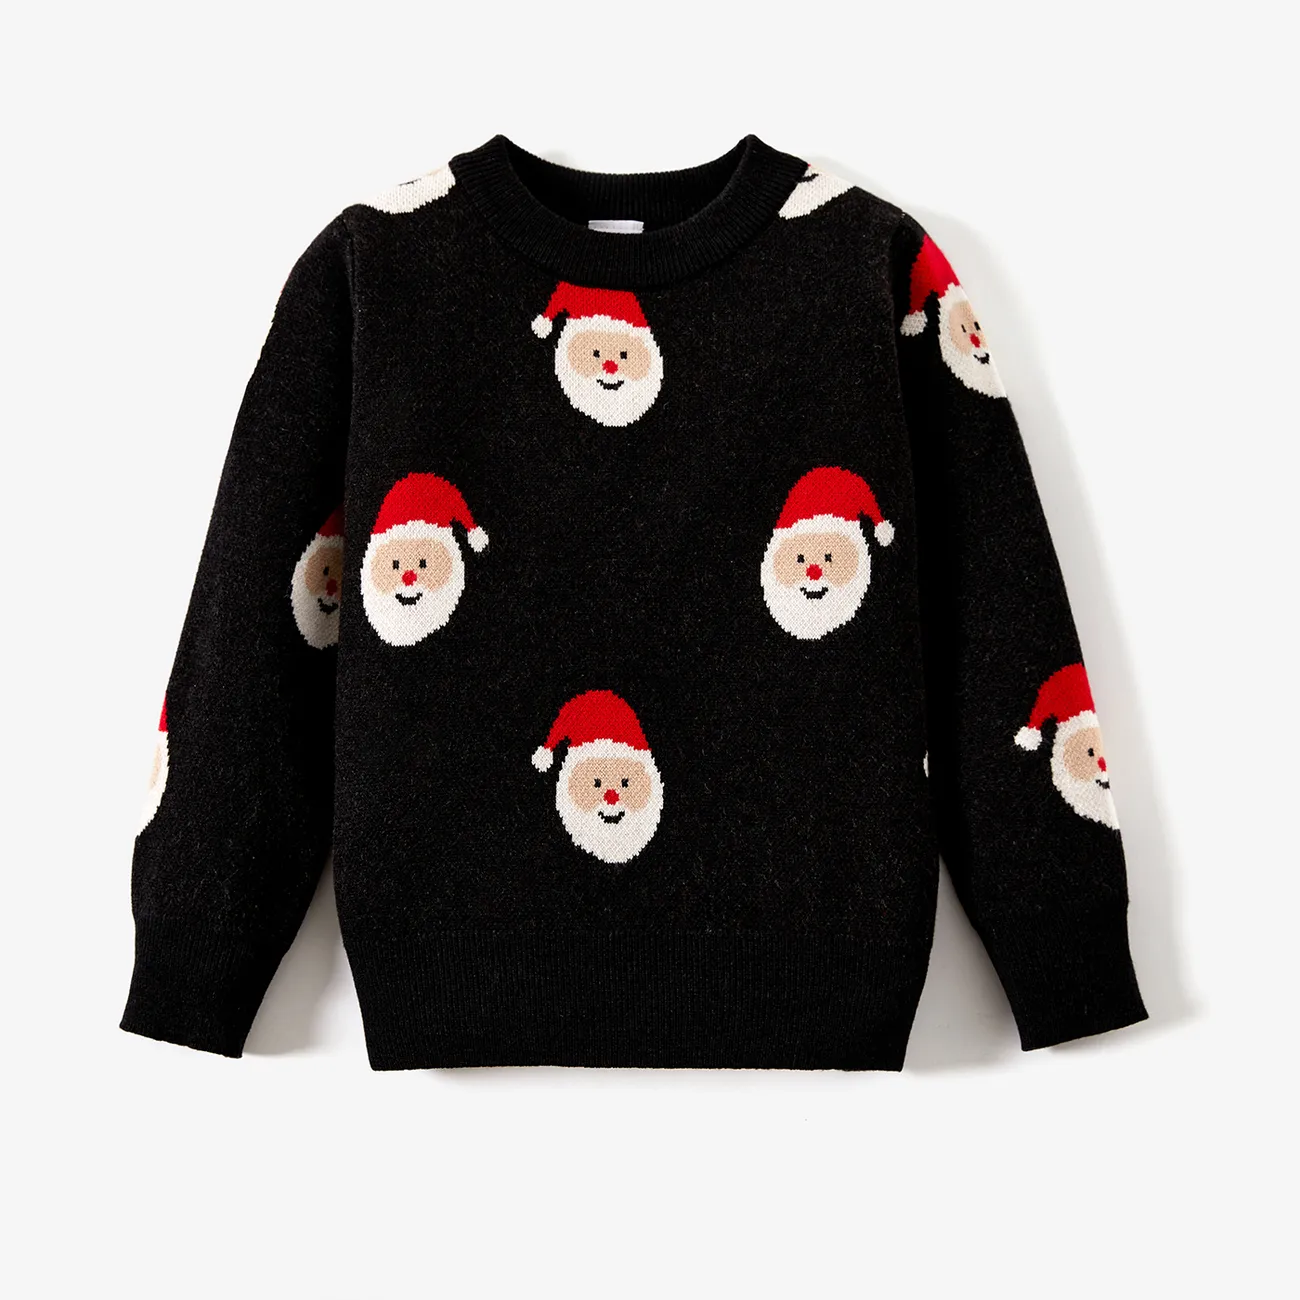 Christmas Family Matching Childlike Santa All-over Print Long-sleeve Knit Sweater Tops  big image 1